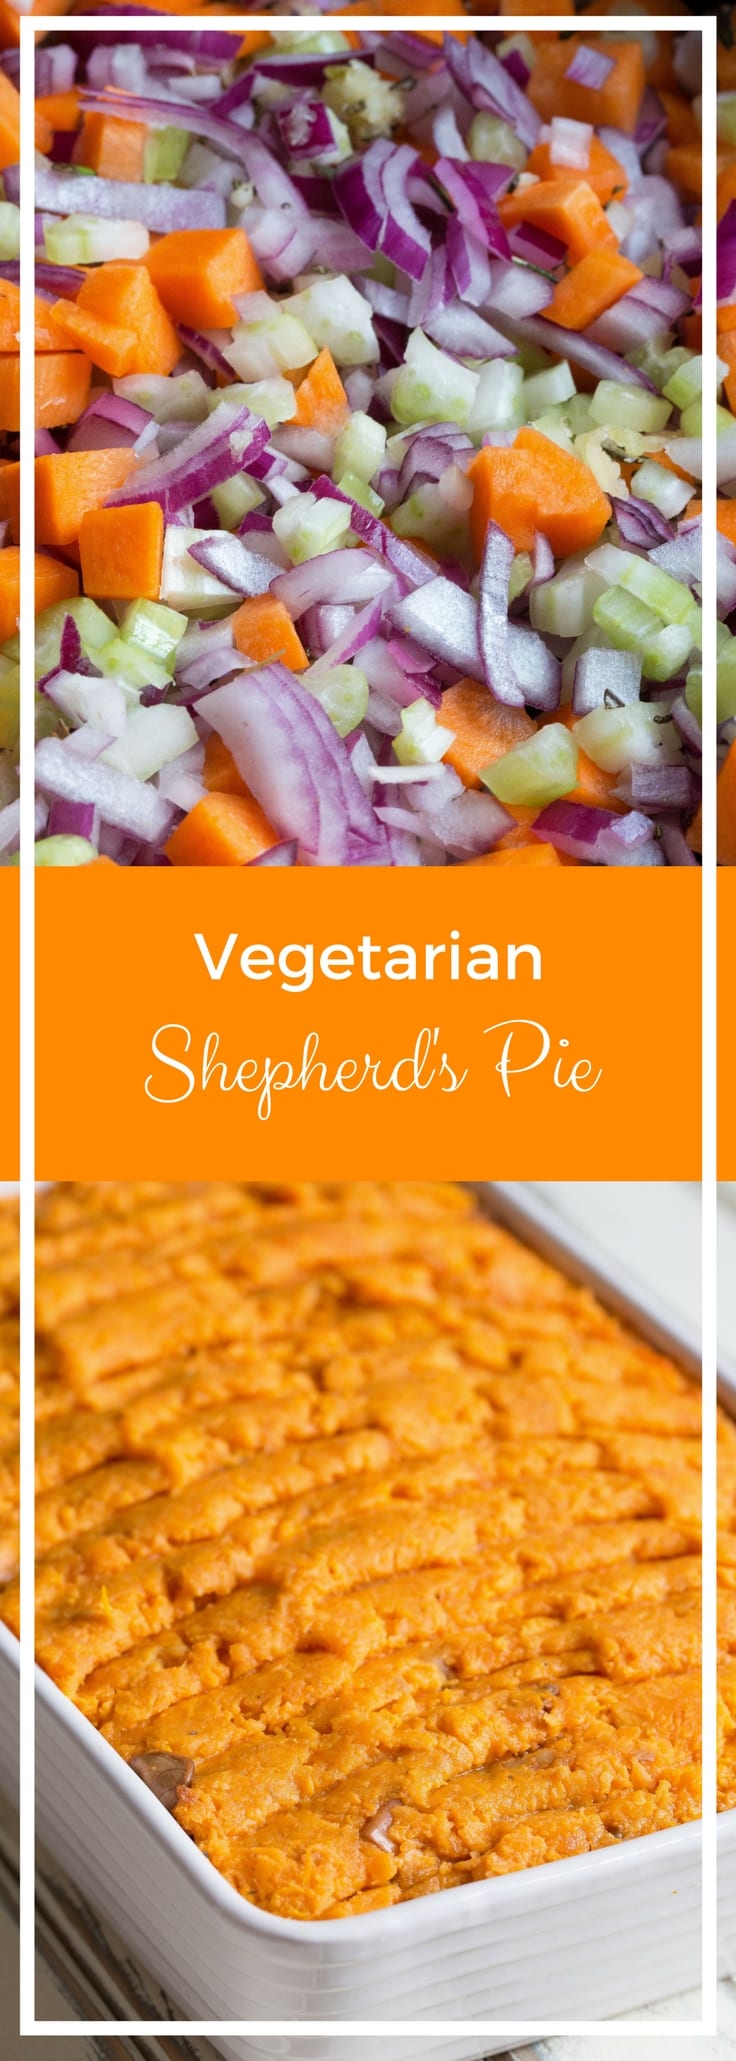 Vegetarian Shepherd's Pie with Sweet Potato Mash - healthy, filling and very tasty, easy to make ahead and great for families | thecookandhim.com